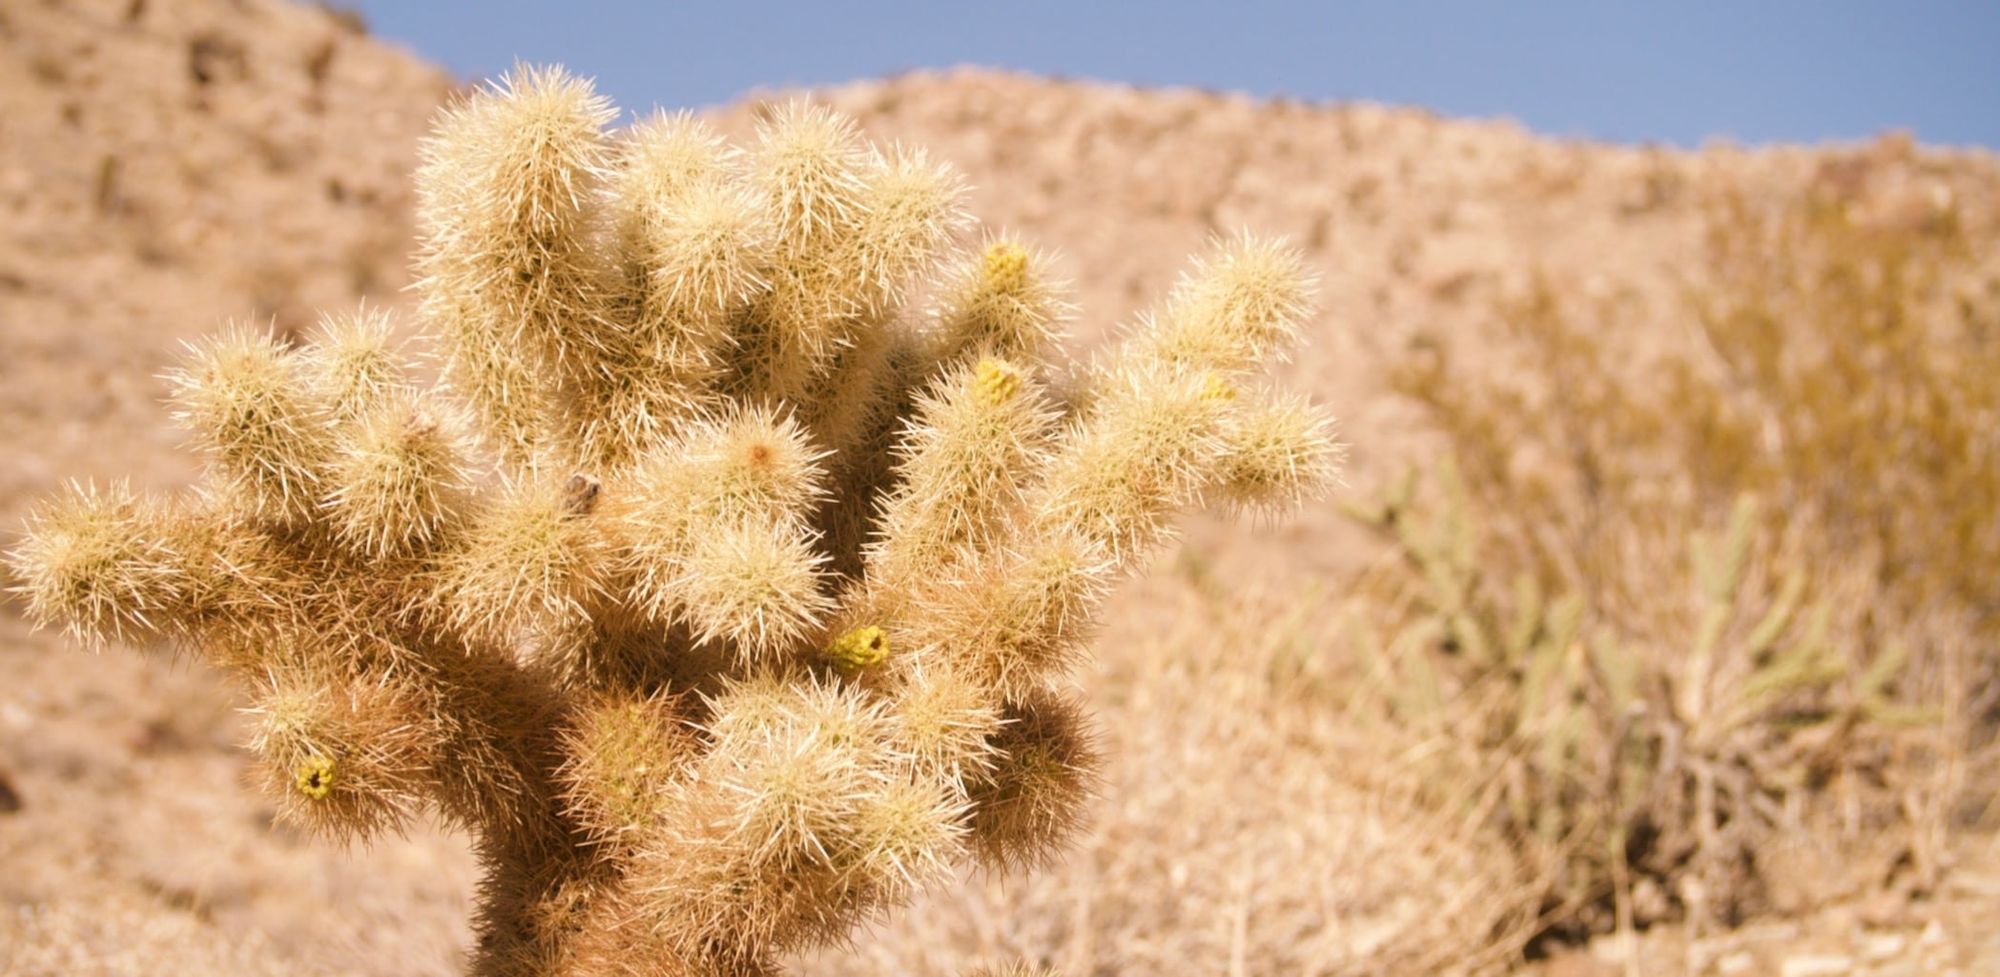 A cactus in sharp focus in front of a rocky mountain